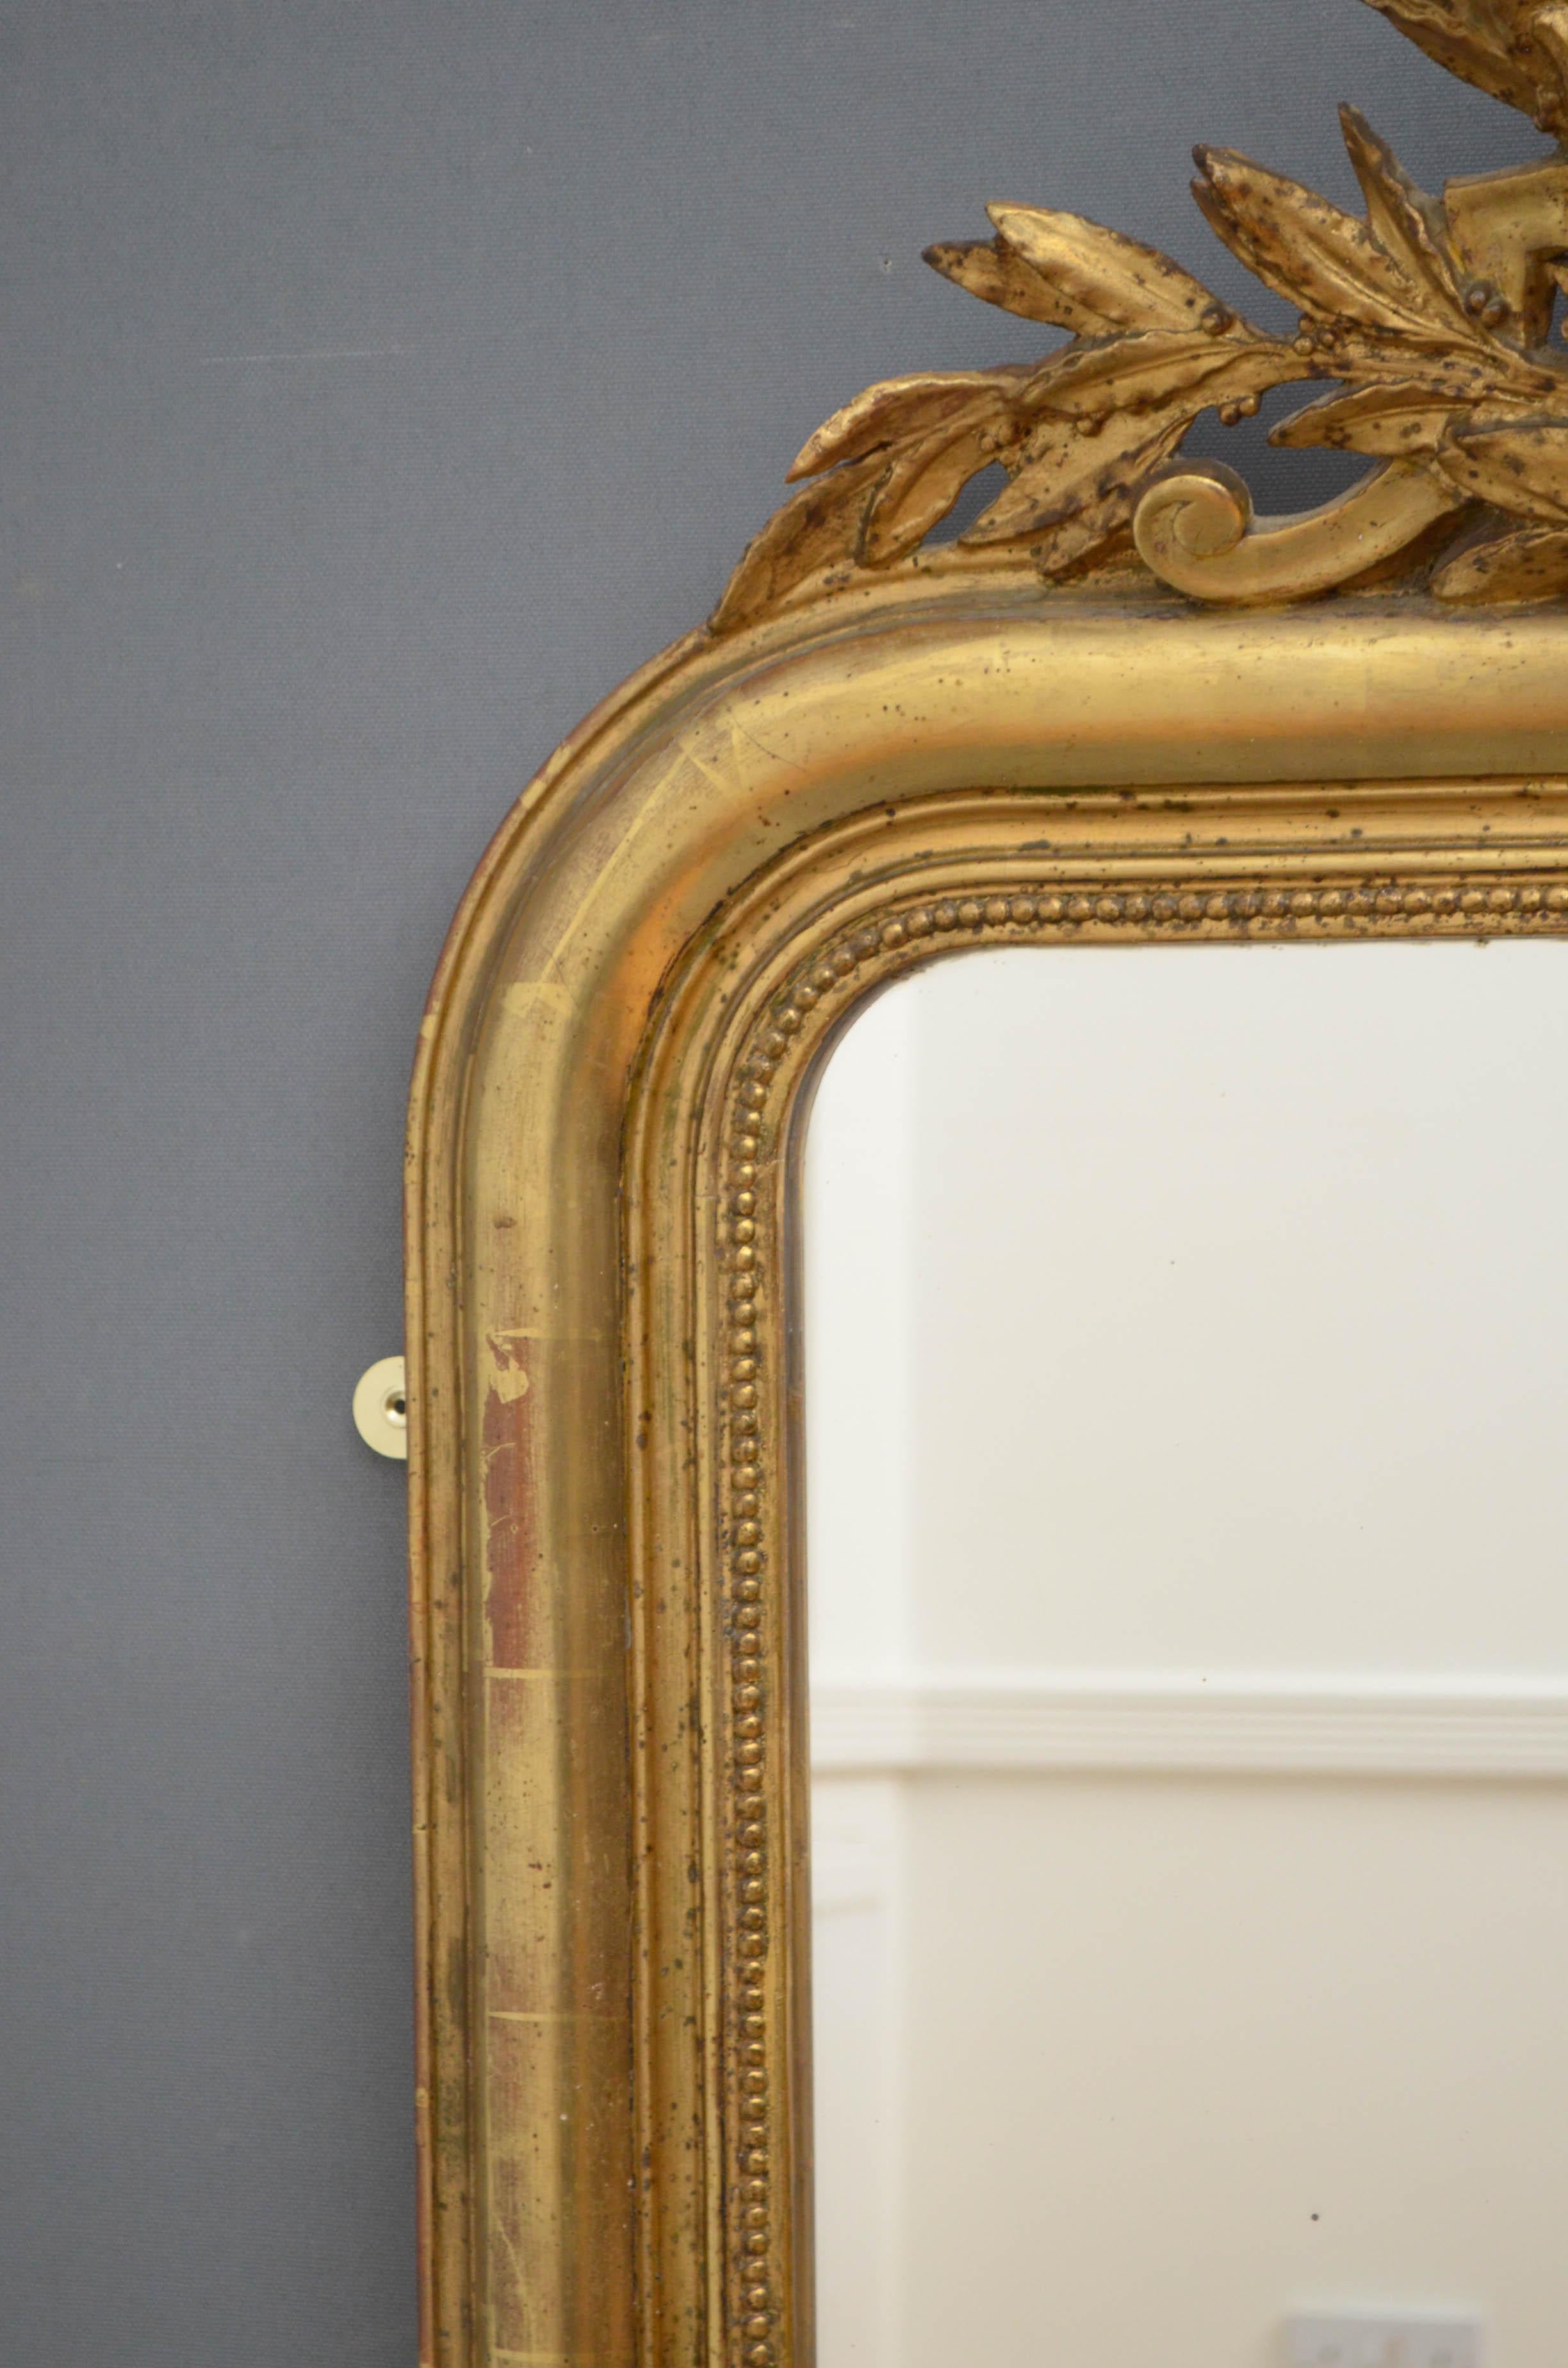 Sn4805, very attractive 19th century gilded mirror, having original glass with some foxing in decorative frame with foliage scrolls to base and leafy crest to the top enclosing small bevelled edge mirror. This antique mirror retains its original